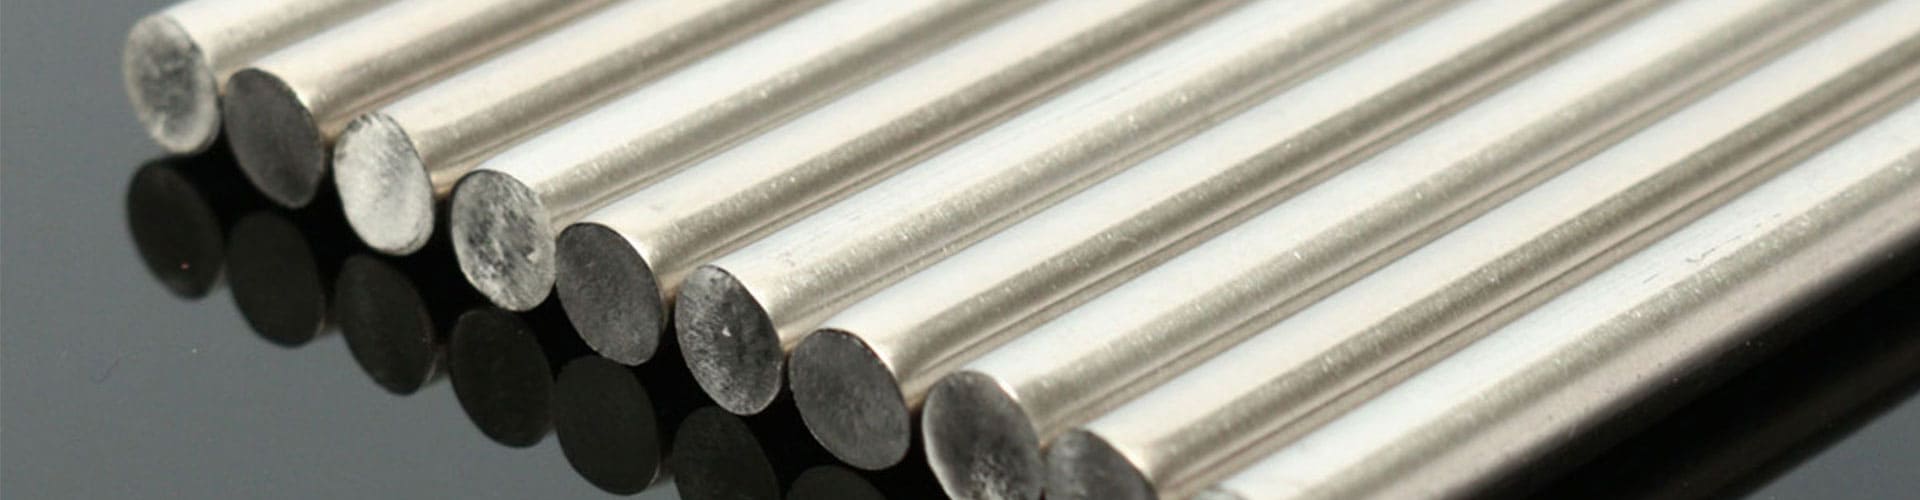 nickel-alloy-201-round-bars-rods-manufacturer-exporter-supplier-in-italy